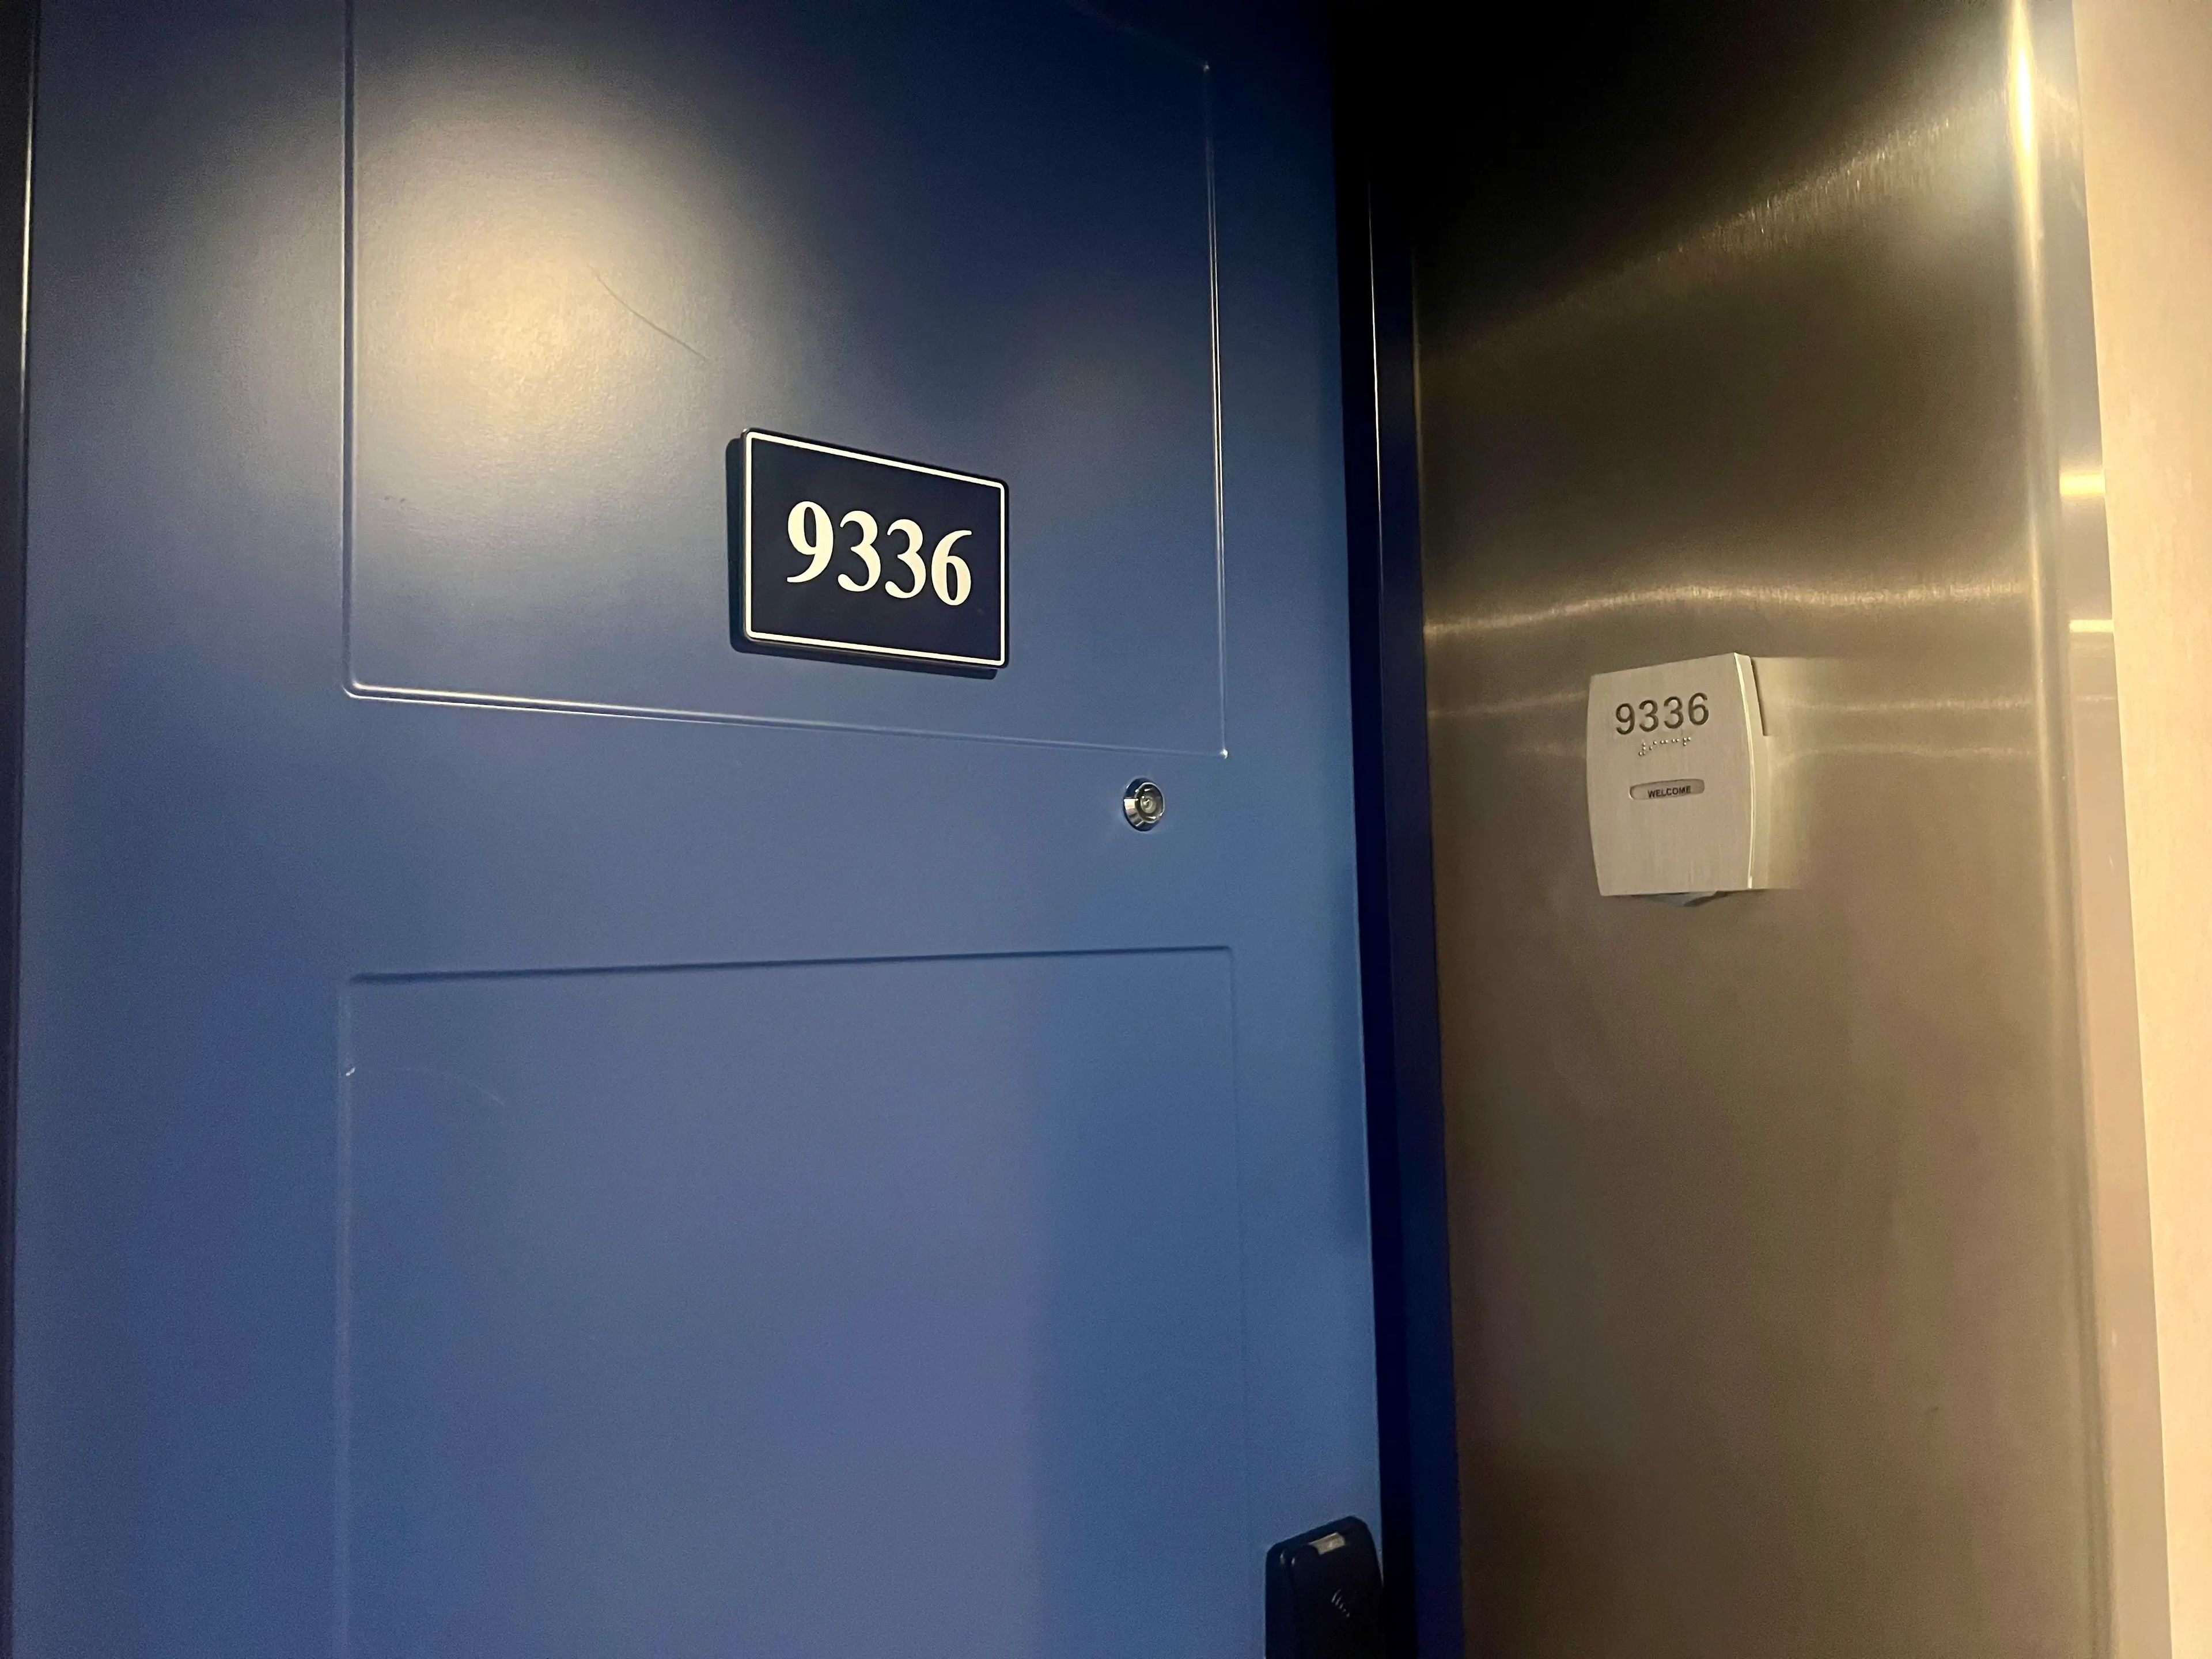 The author's stateroom door, which is blue.